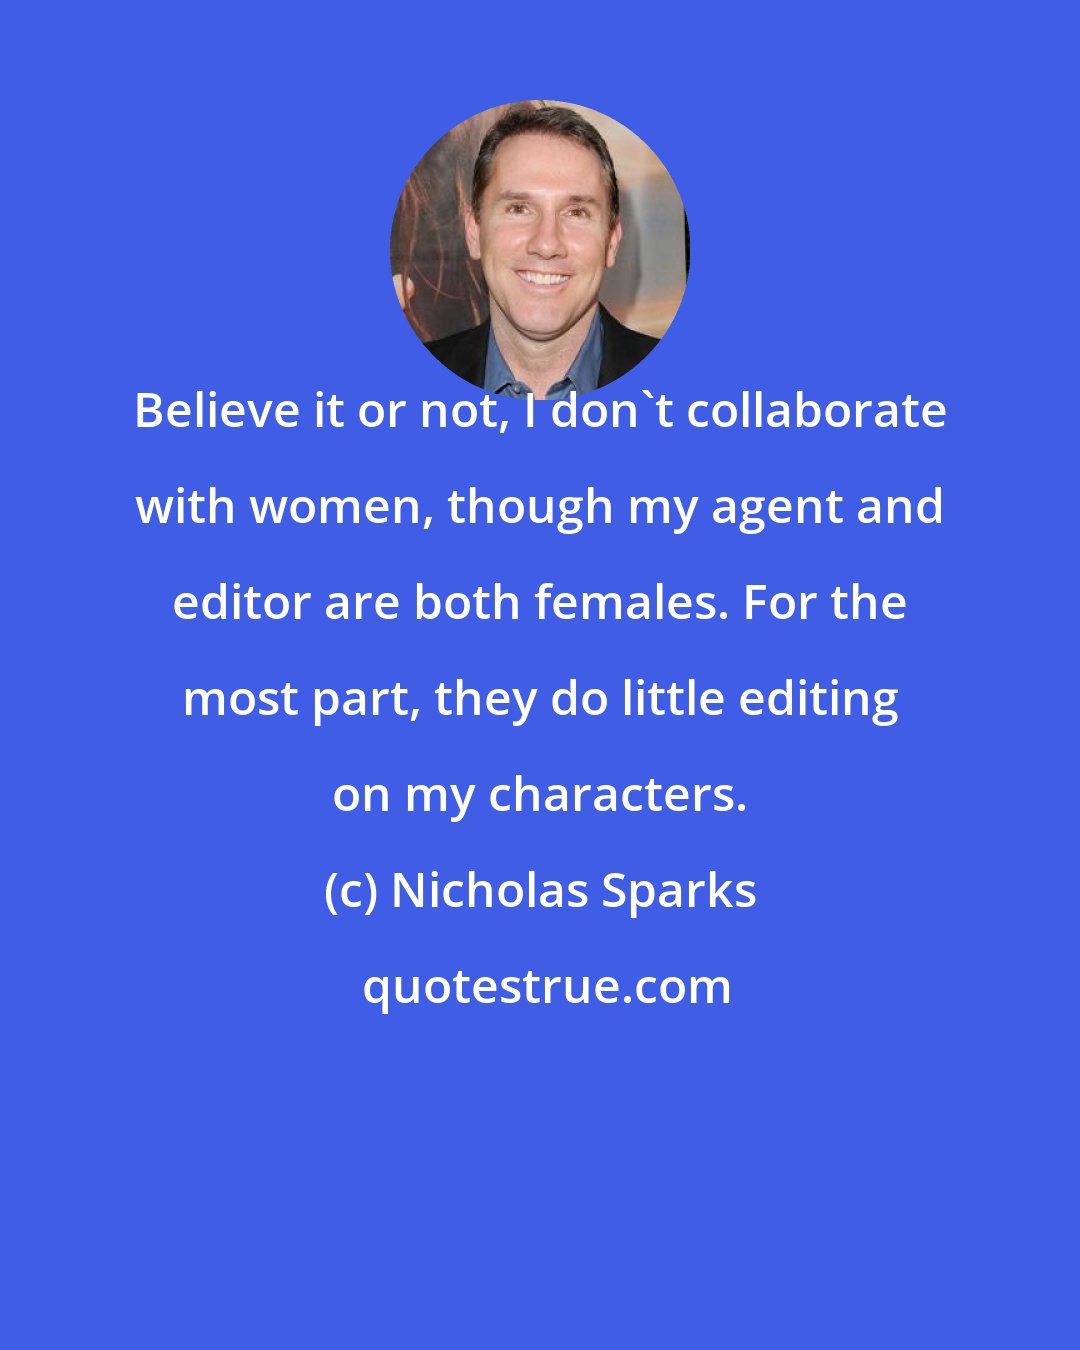 Nicholas Sparks: Believe it or not, I don't collaborate with women, though my agent and editor are both females. For the most part, they do little editing on my characters.